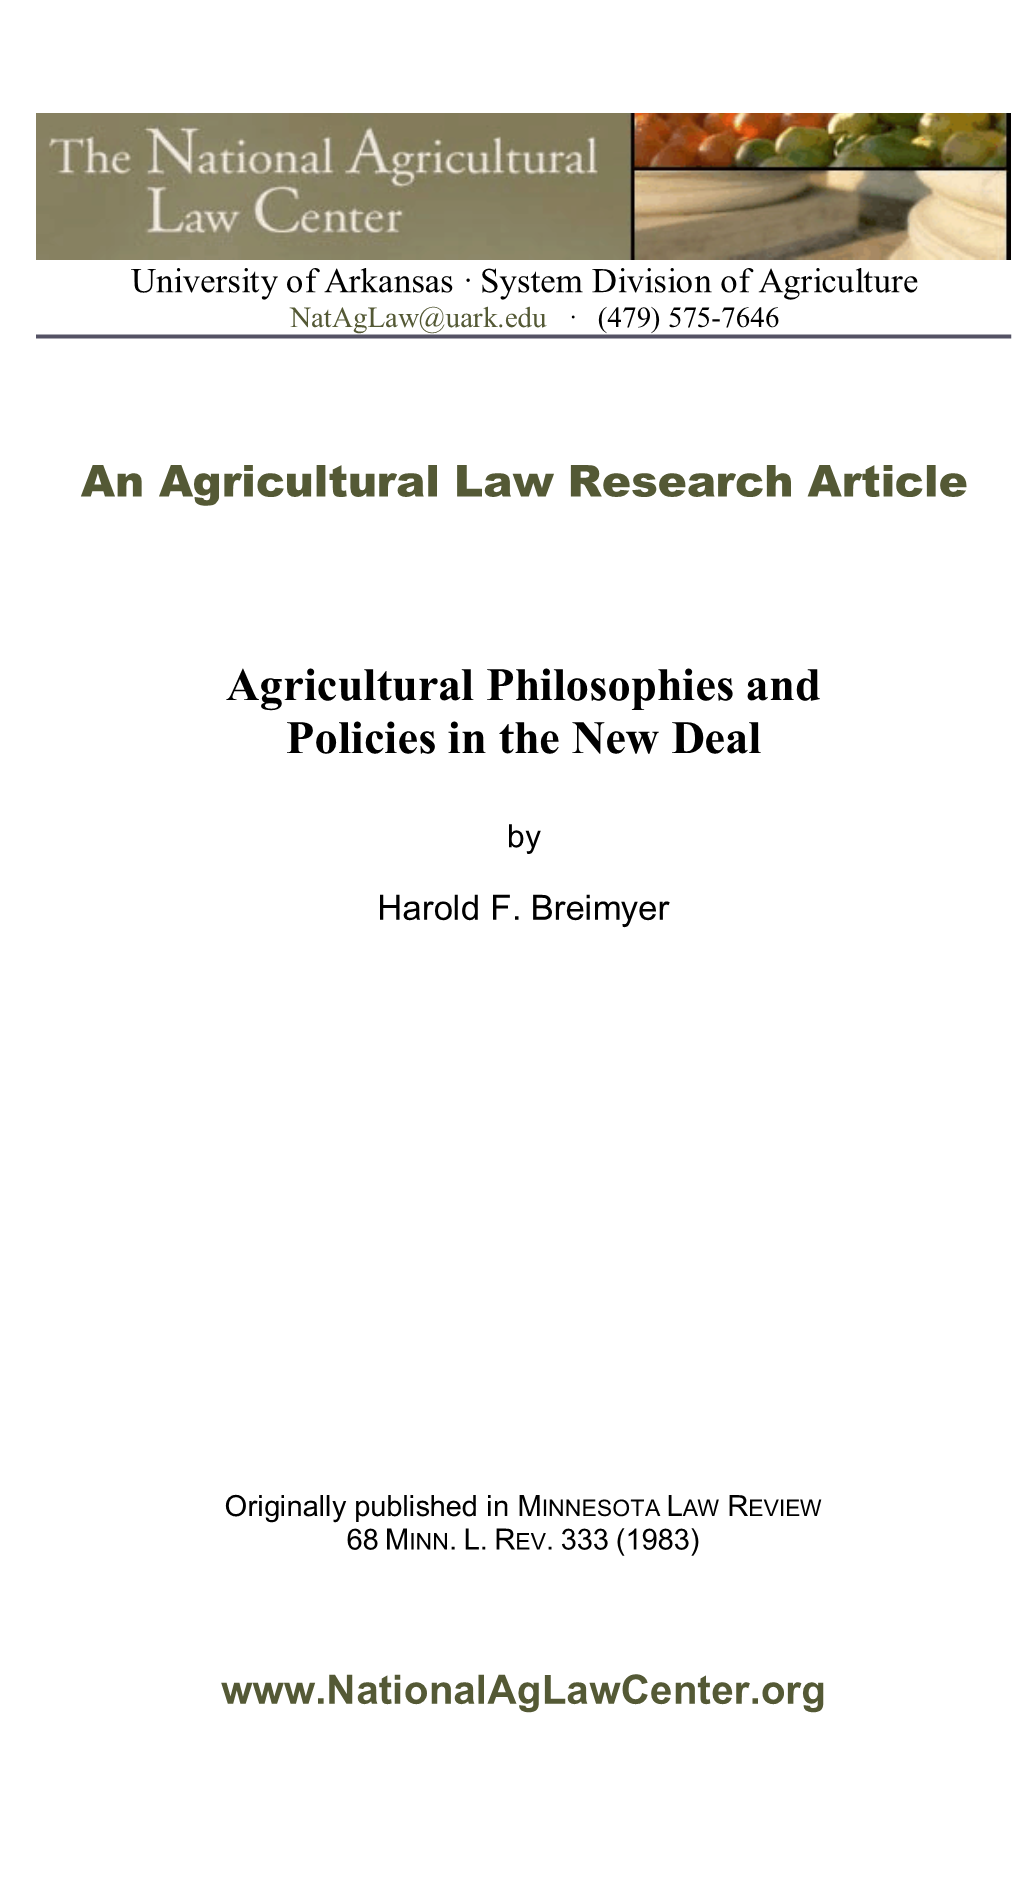 Agricultural Philosophies and Policies in the New Deal